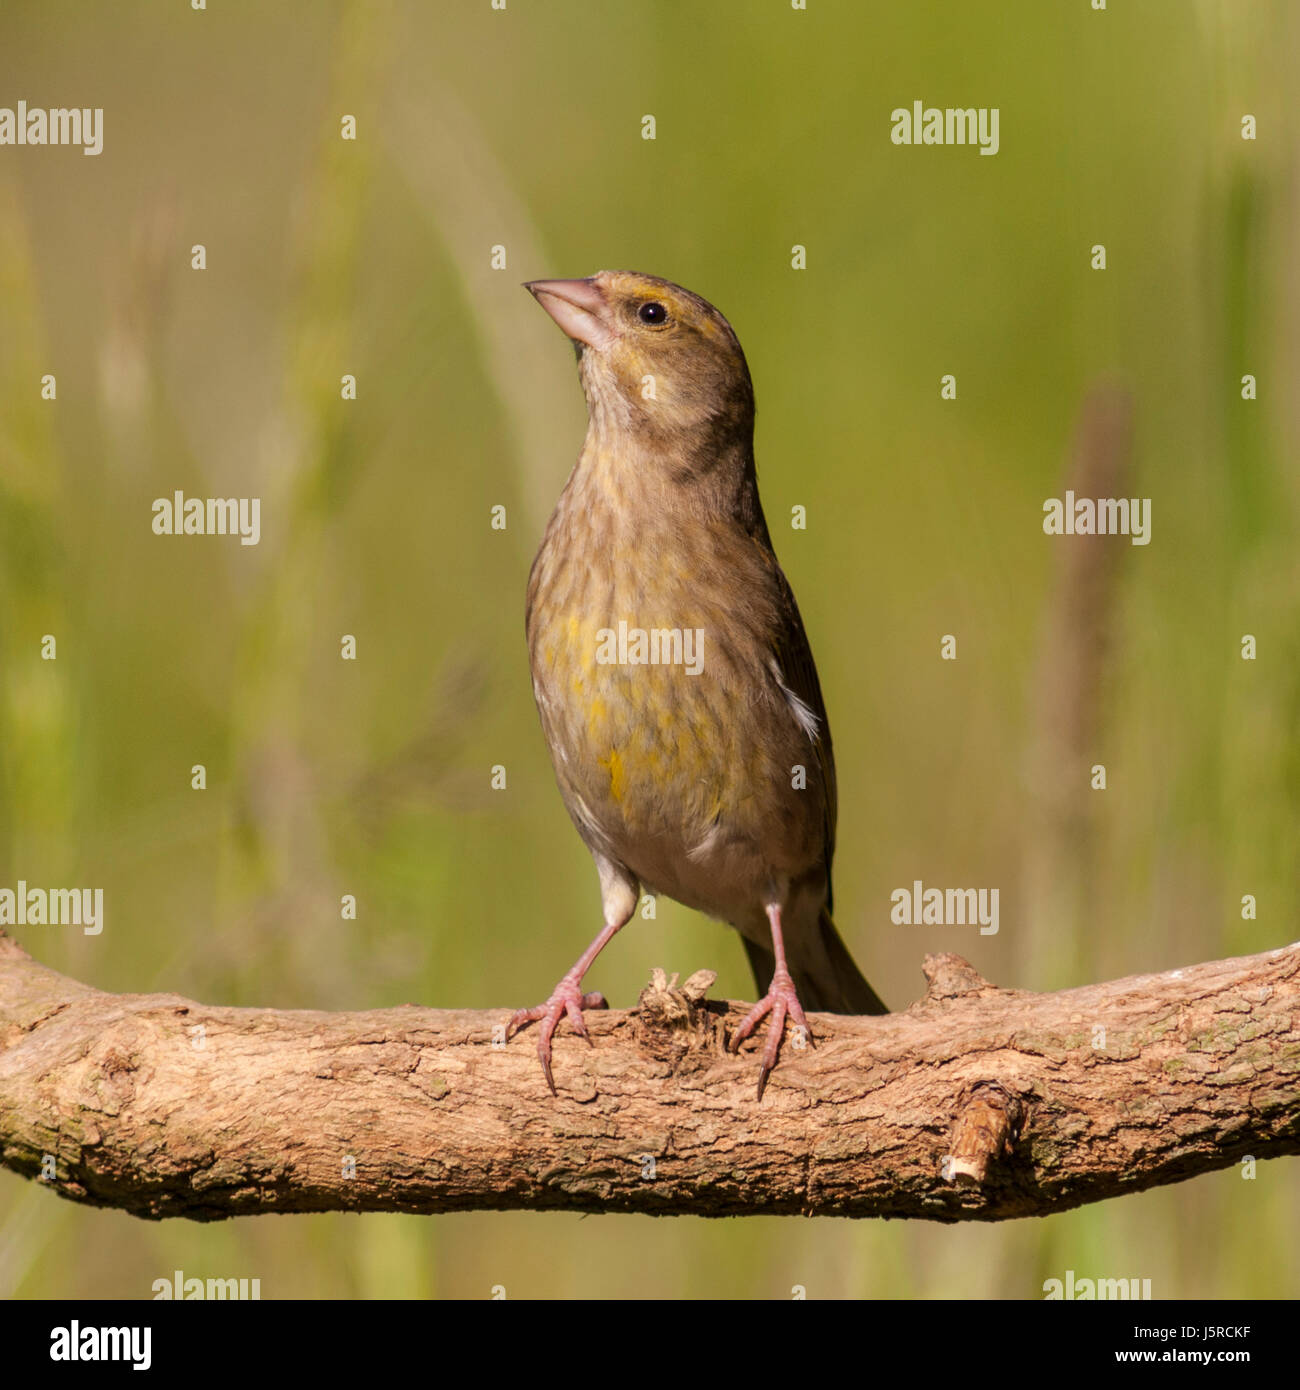 A female Greenfinch (Carduelis chloris) in the Uk Stock Photo